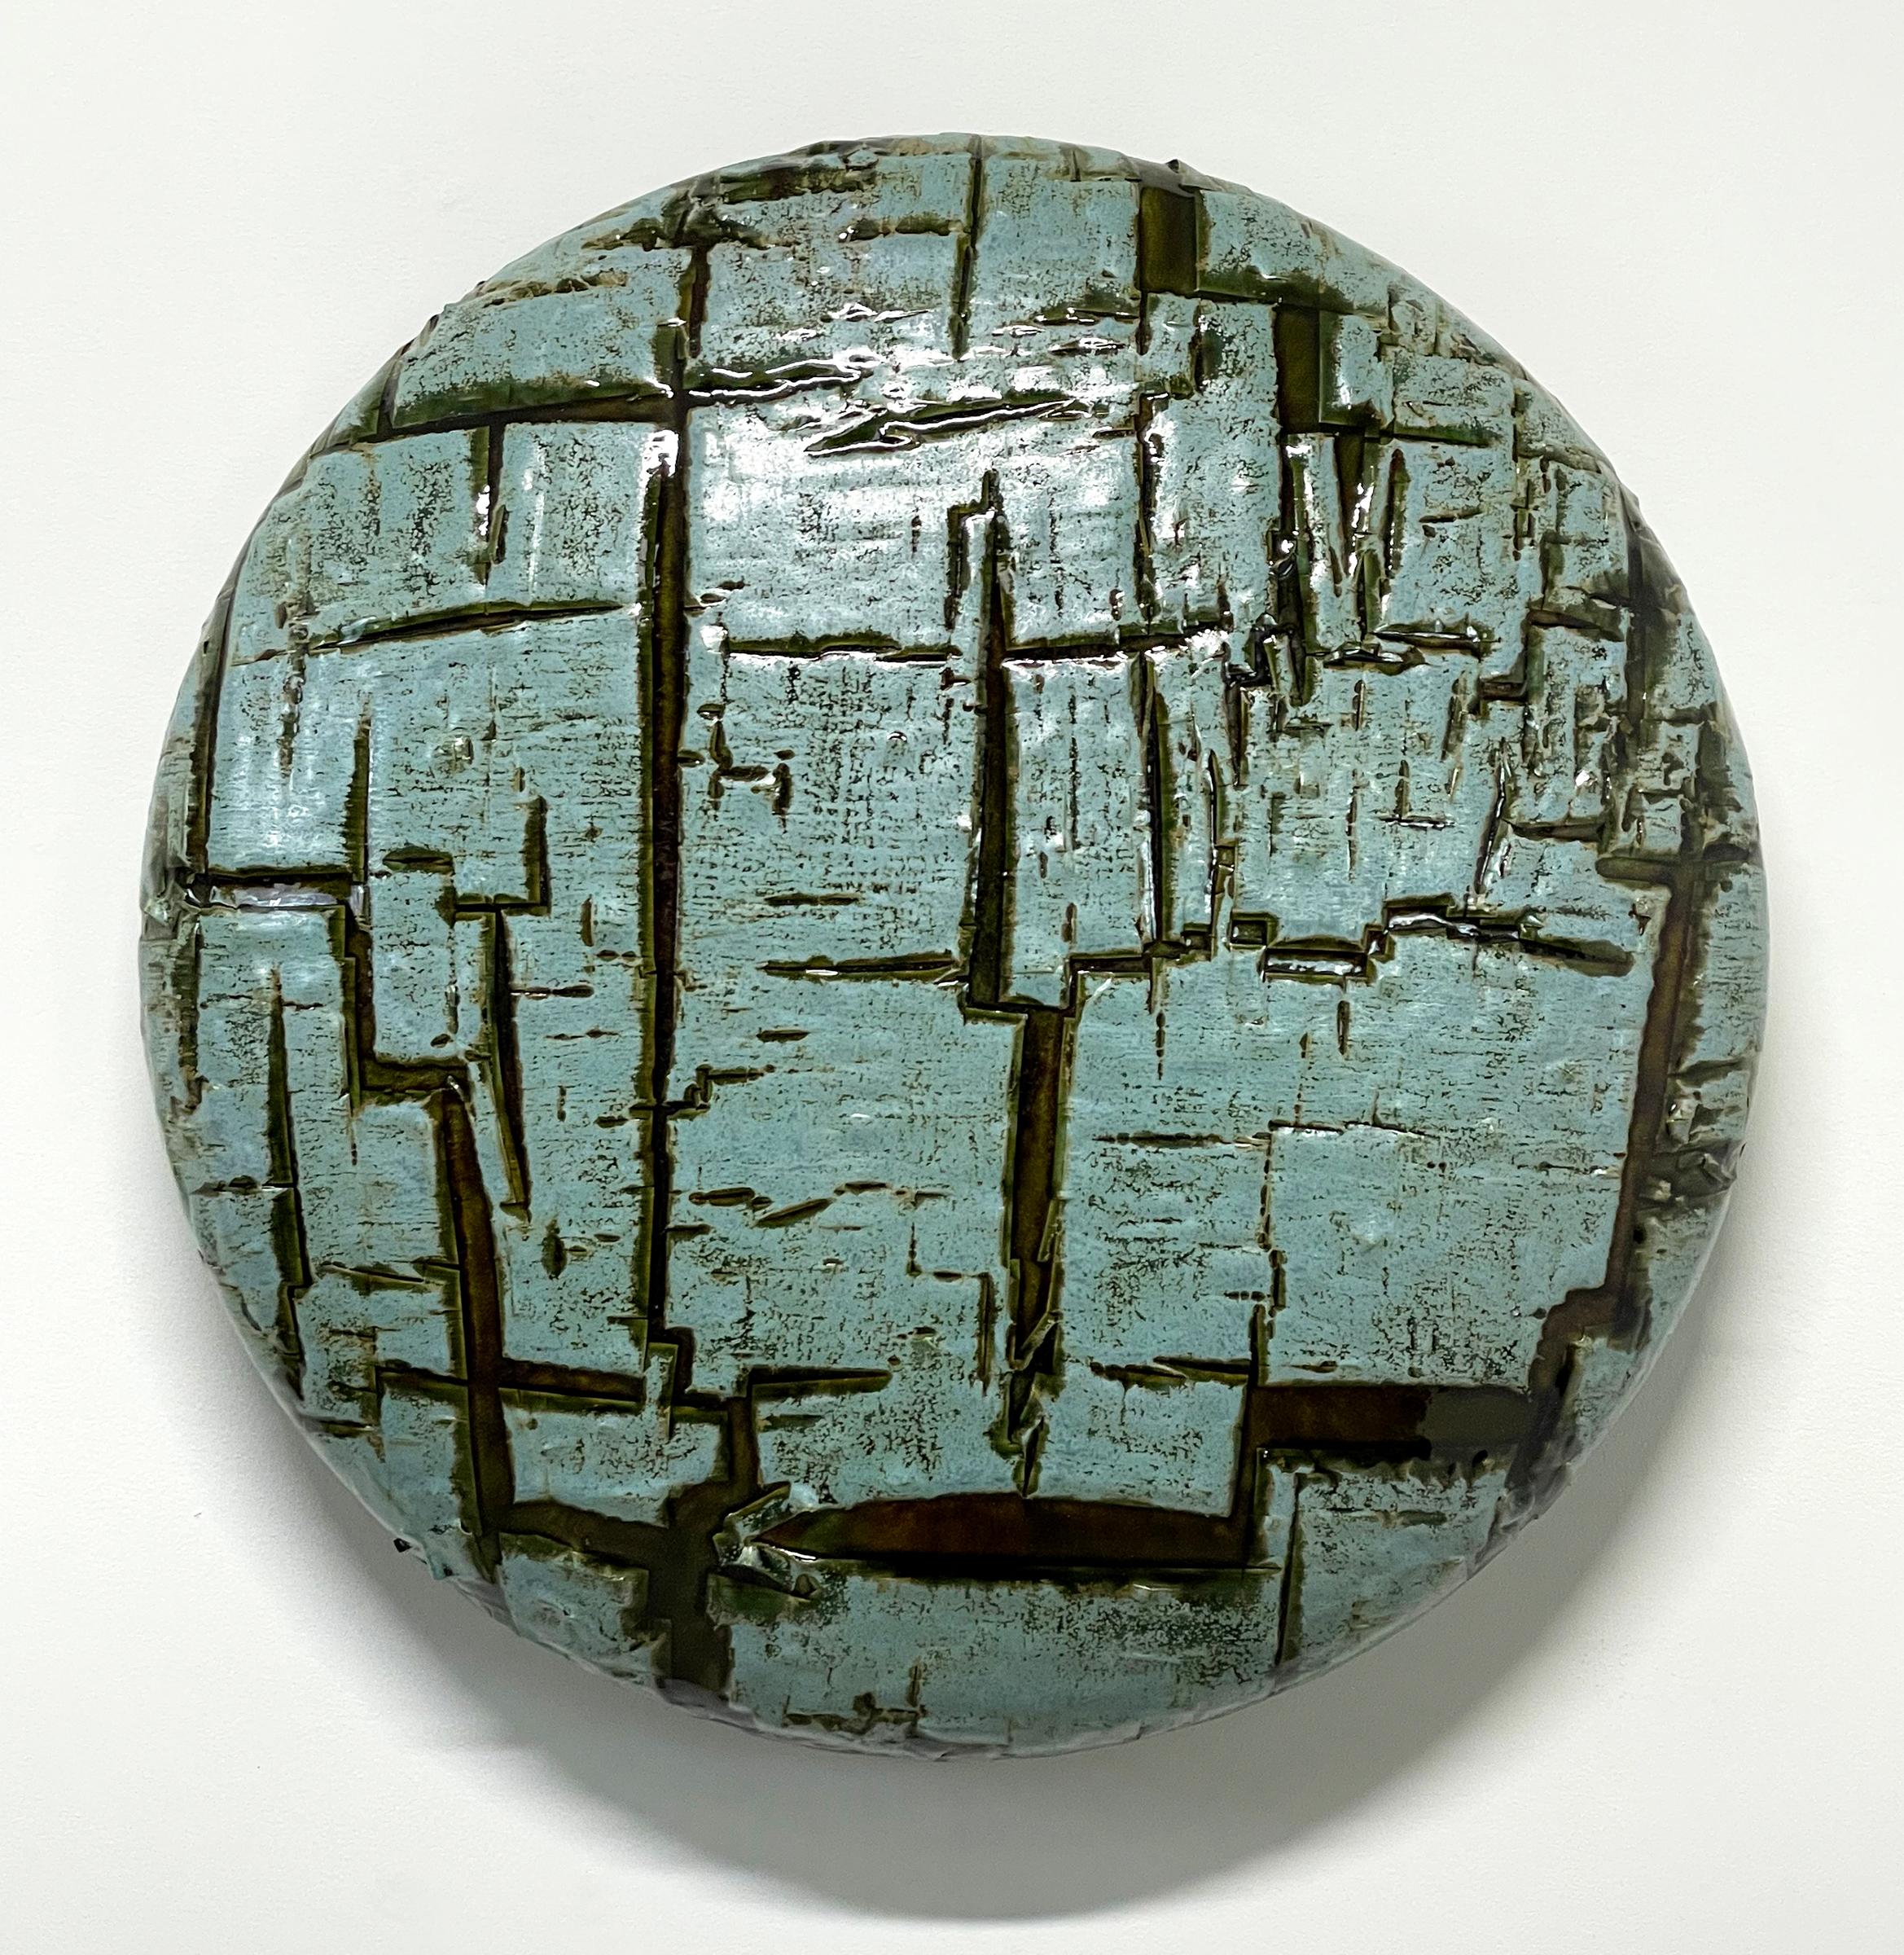 American Fractured - Ceramic Wall Sculpture by William Edwards For Sale